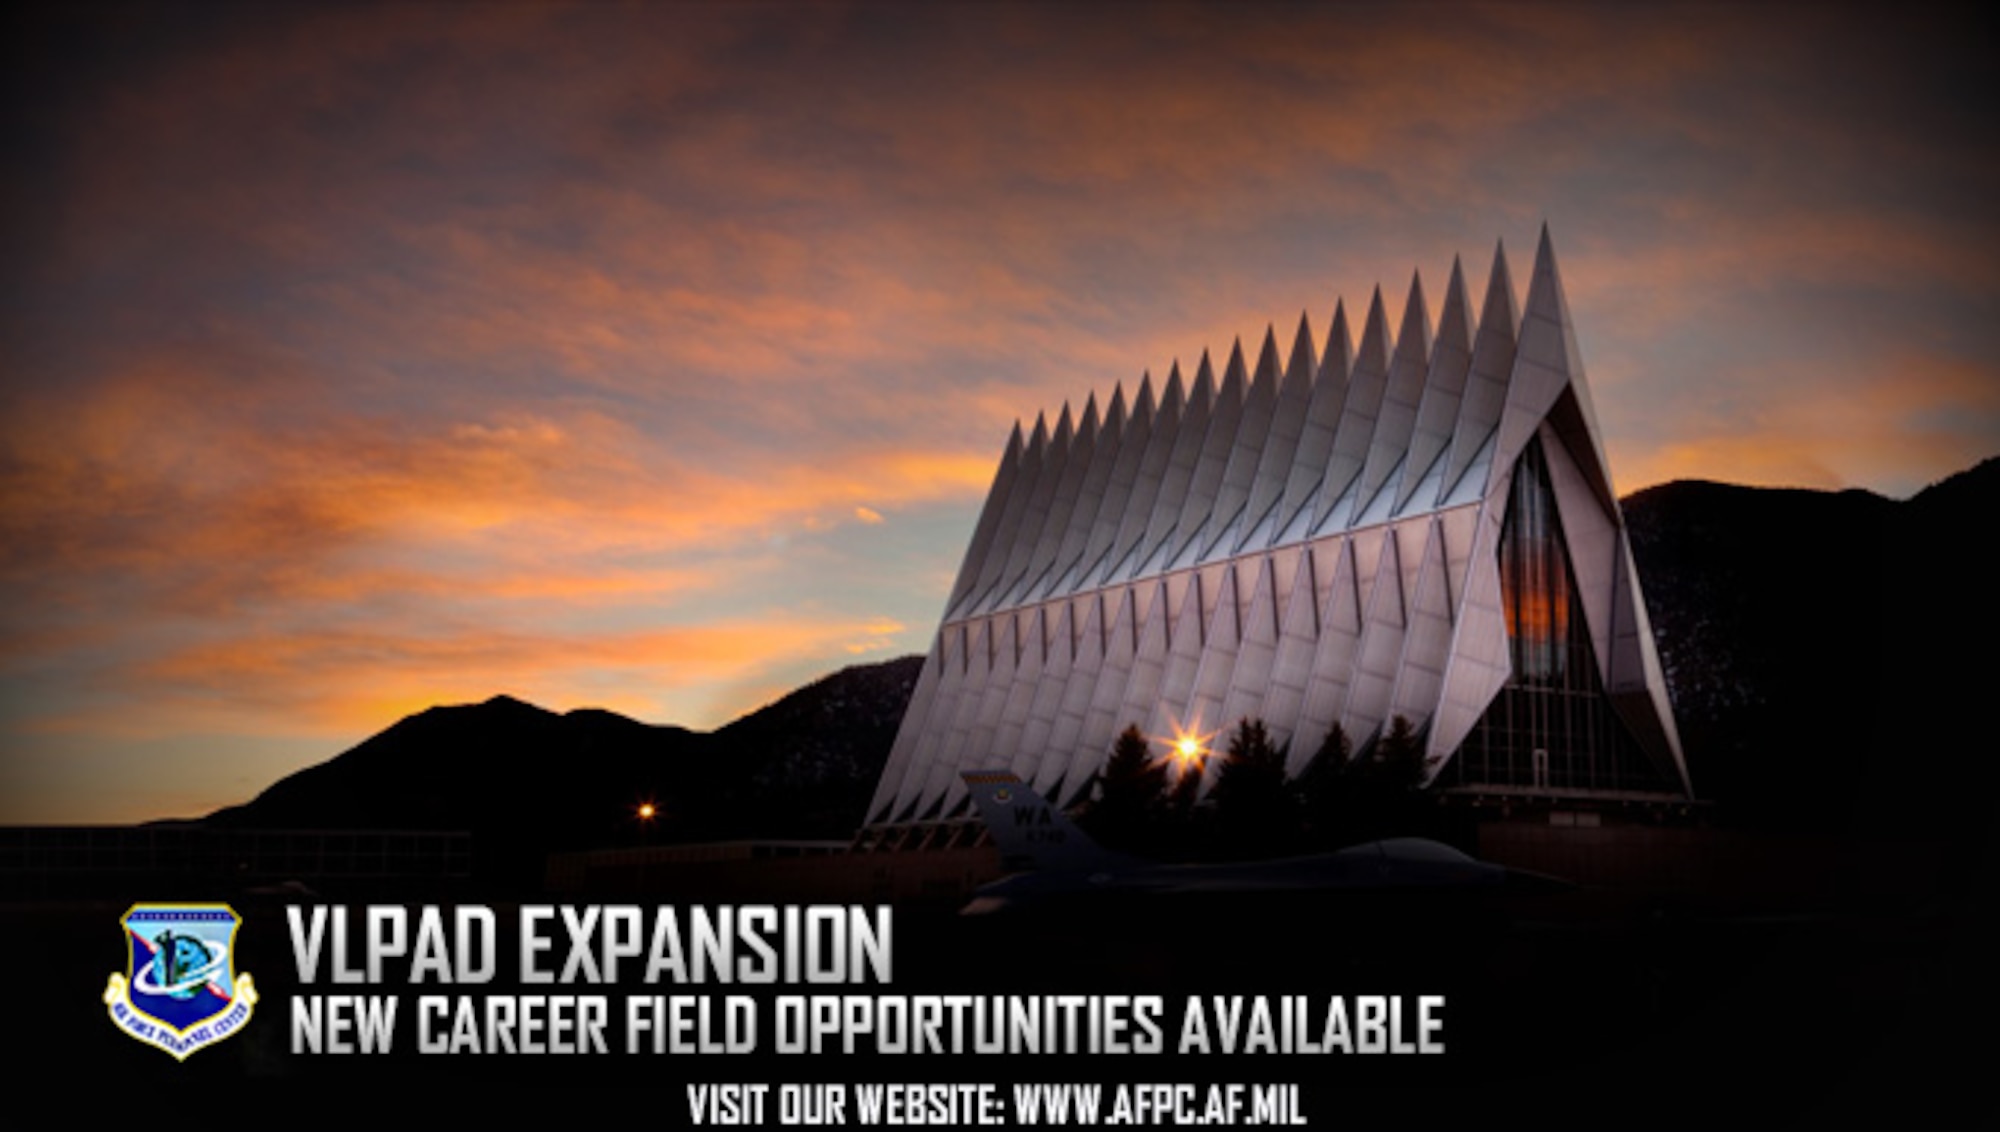 The Air Force Voluntary Period of Active Duty program offers opportunities for certain Reserve and Guard officers to serve on active duty for three years and one day in a number of career fields. U.S Air Force Academy instructor is one of the openings on that list. (U.S. Air Force graphic by Staff Sgt. Alexx Pons)